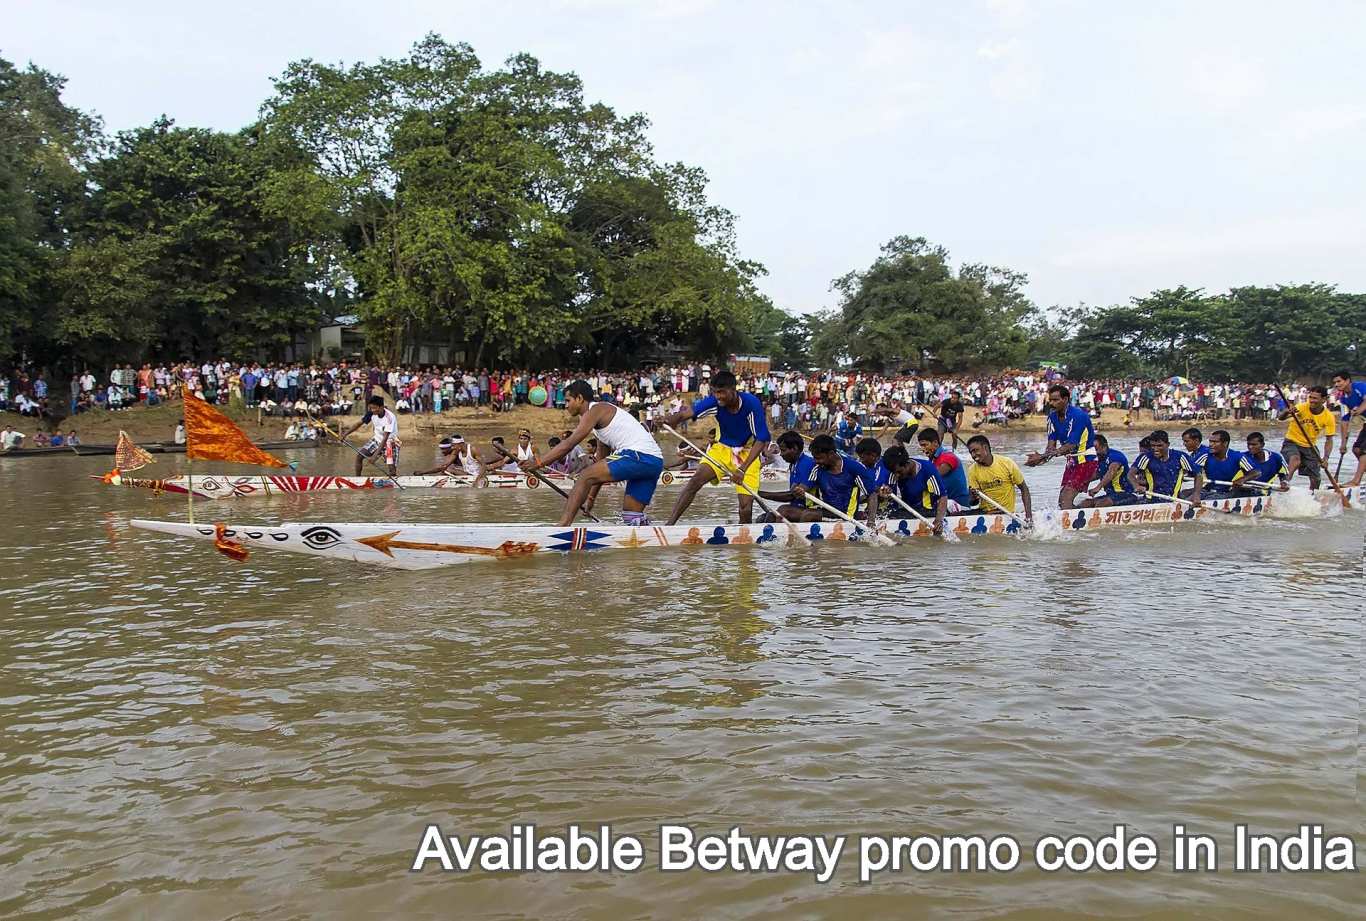 Available Betway promo code in India